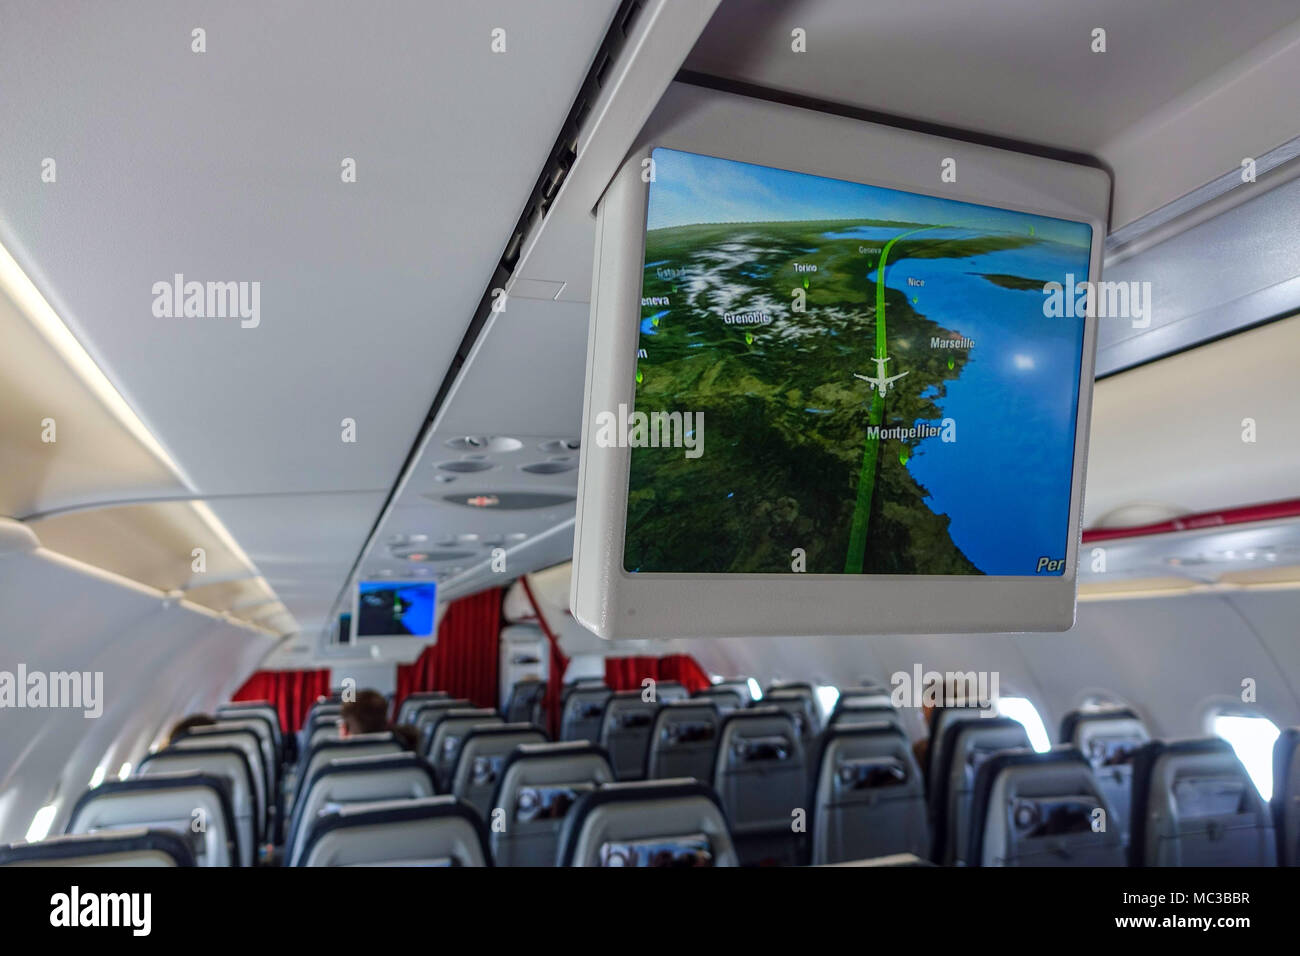 On board quiet Aegean Airlines Airbus A320 with TV screens showing flight progress Stock Photo